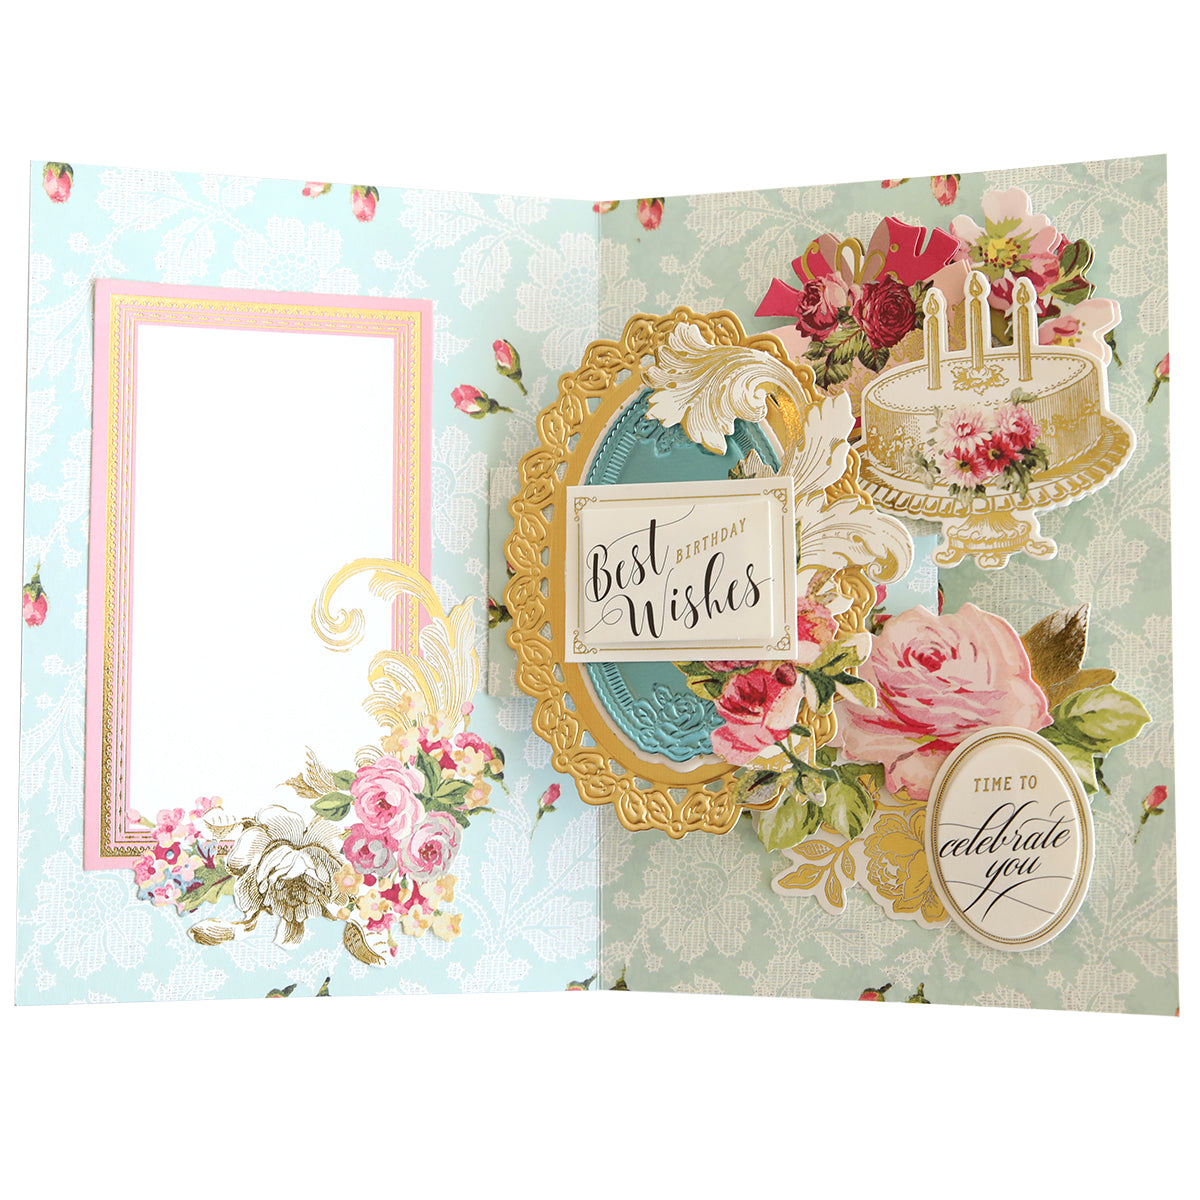 A decorative greeting card with floral patterns, featuring a "best wishes" message, cake imagery, and embellishments on a textured background created using Swing Out Dies.